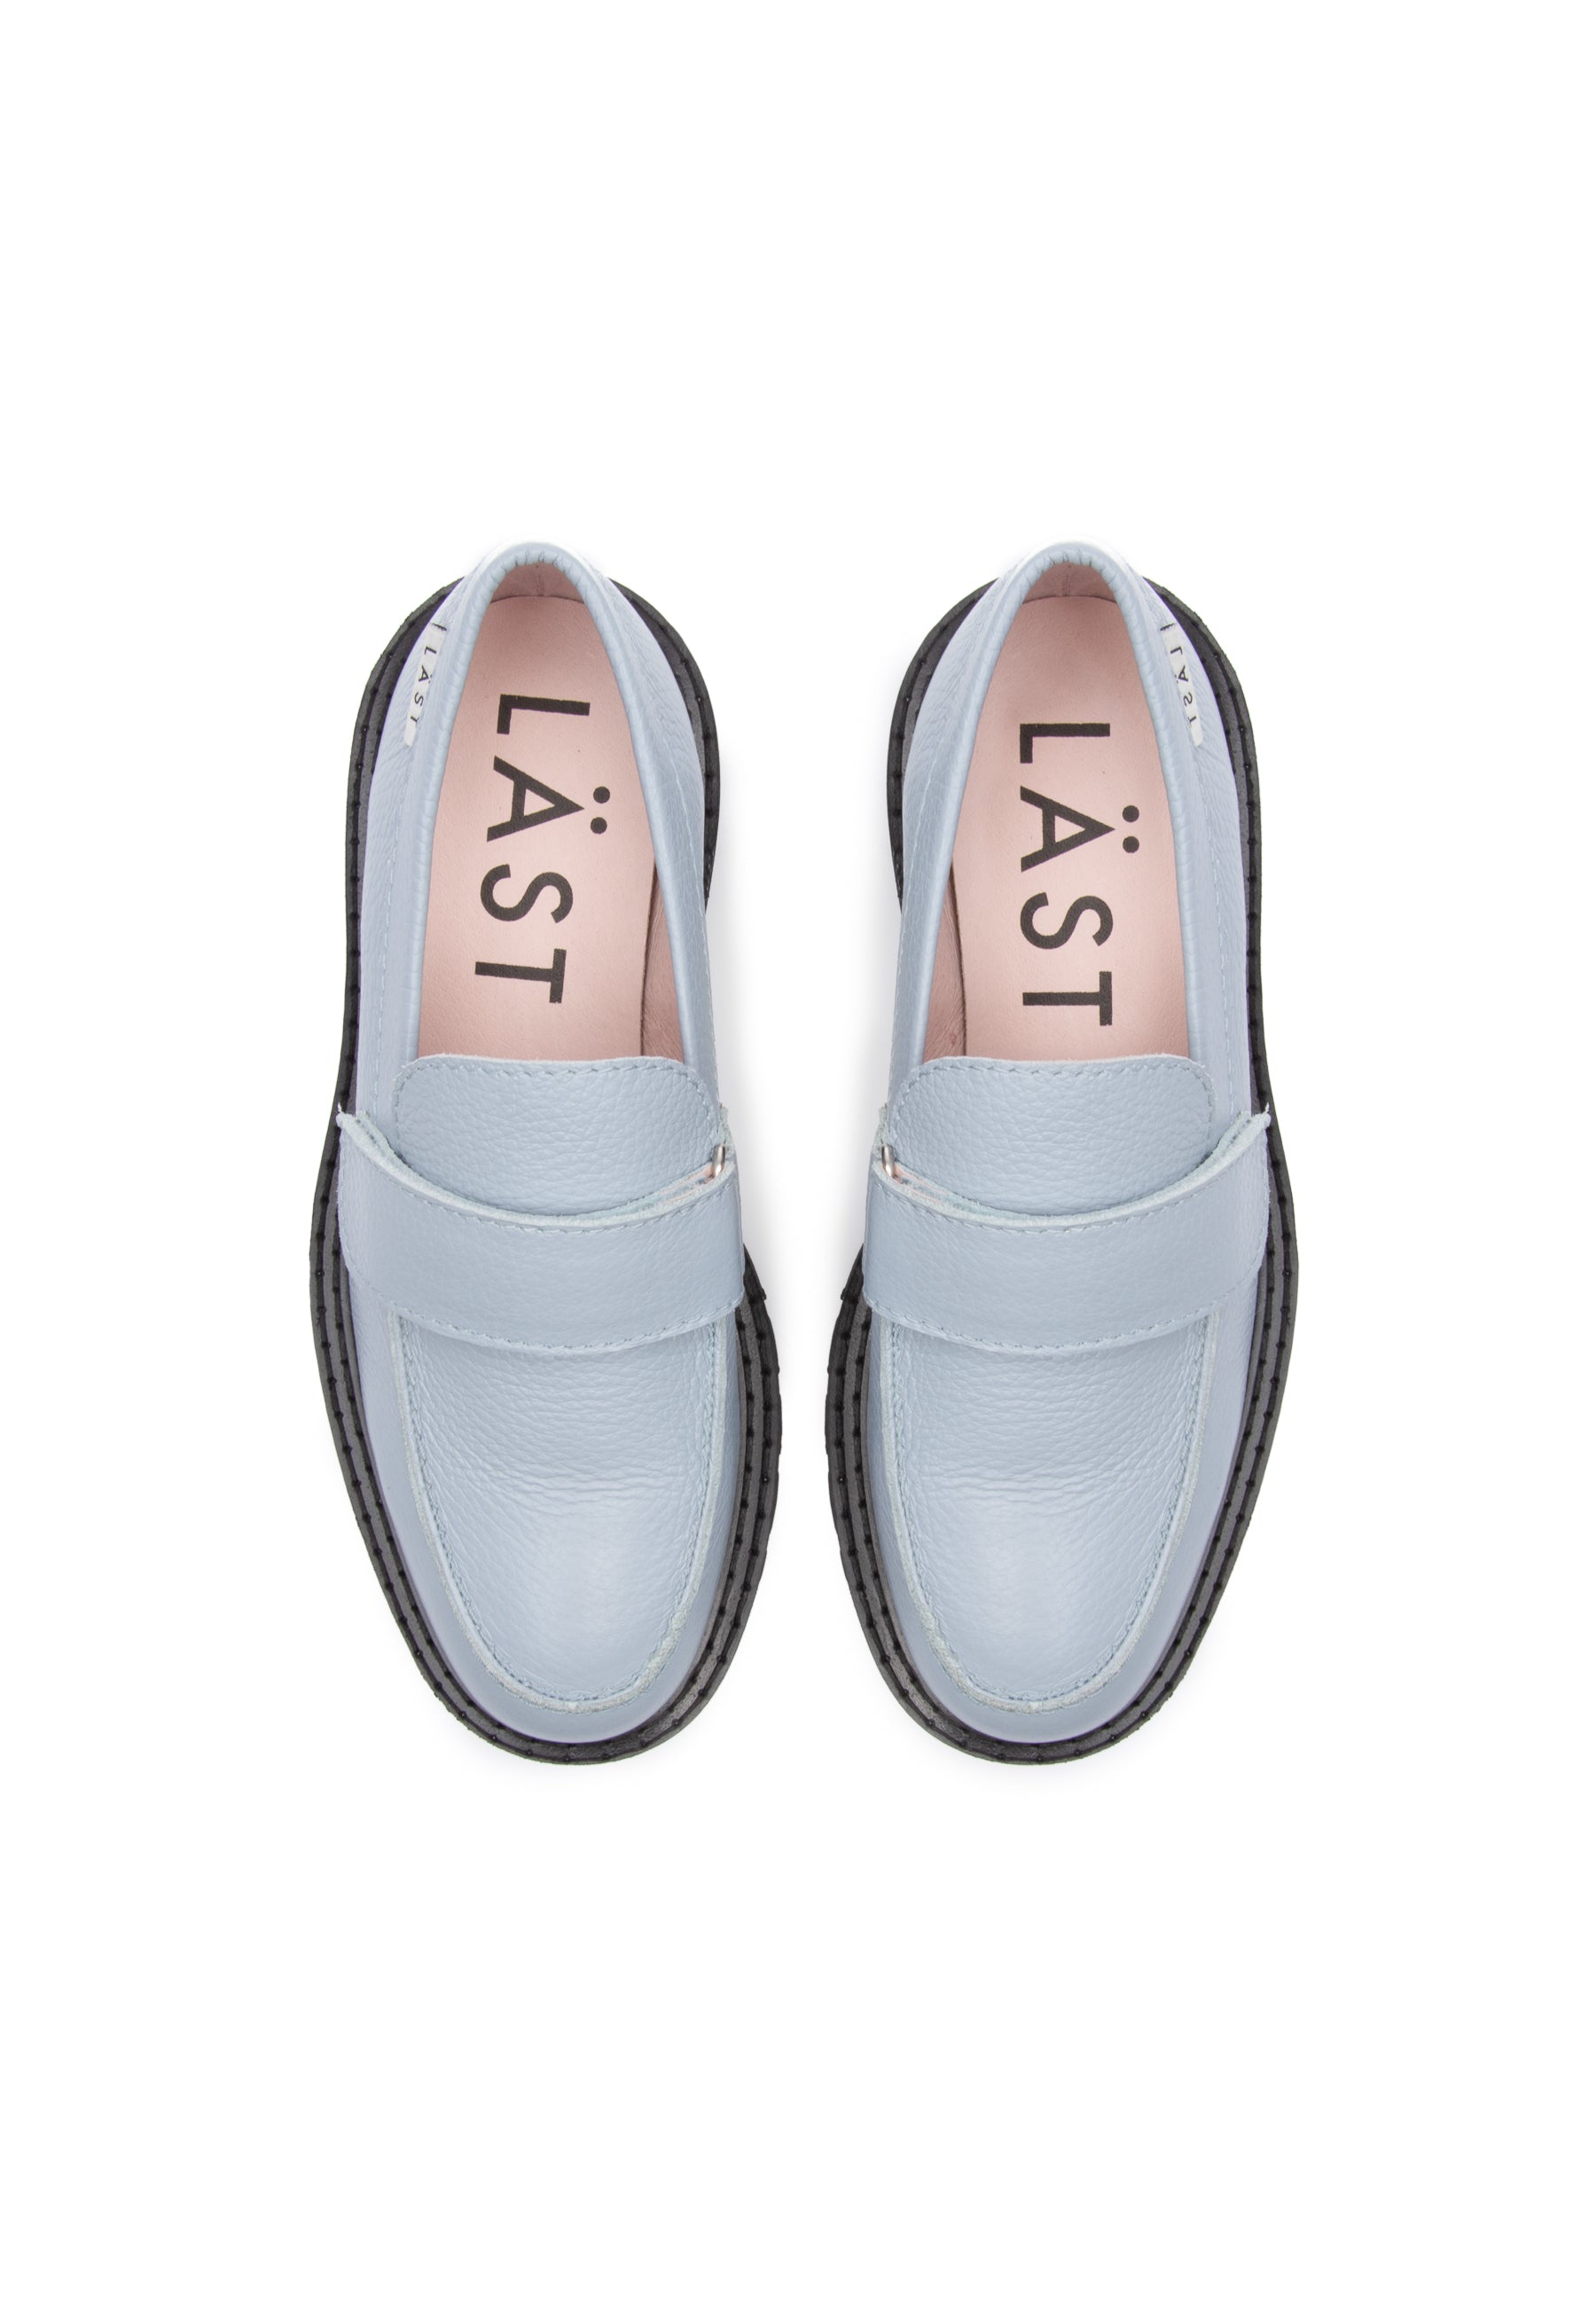 Lady Dusty Blue Leather Loafers LAST1550 - 3